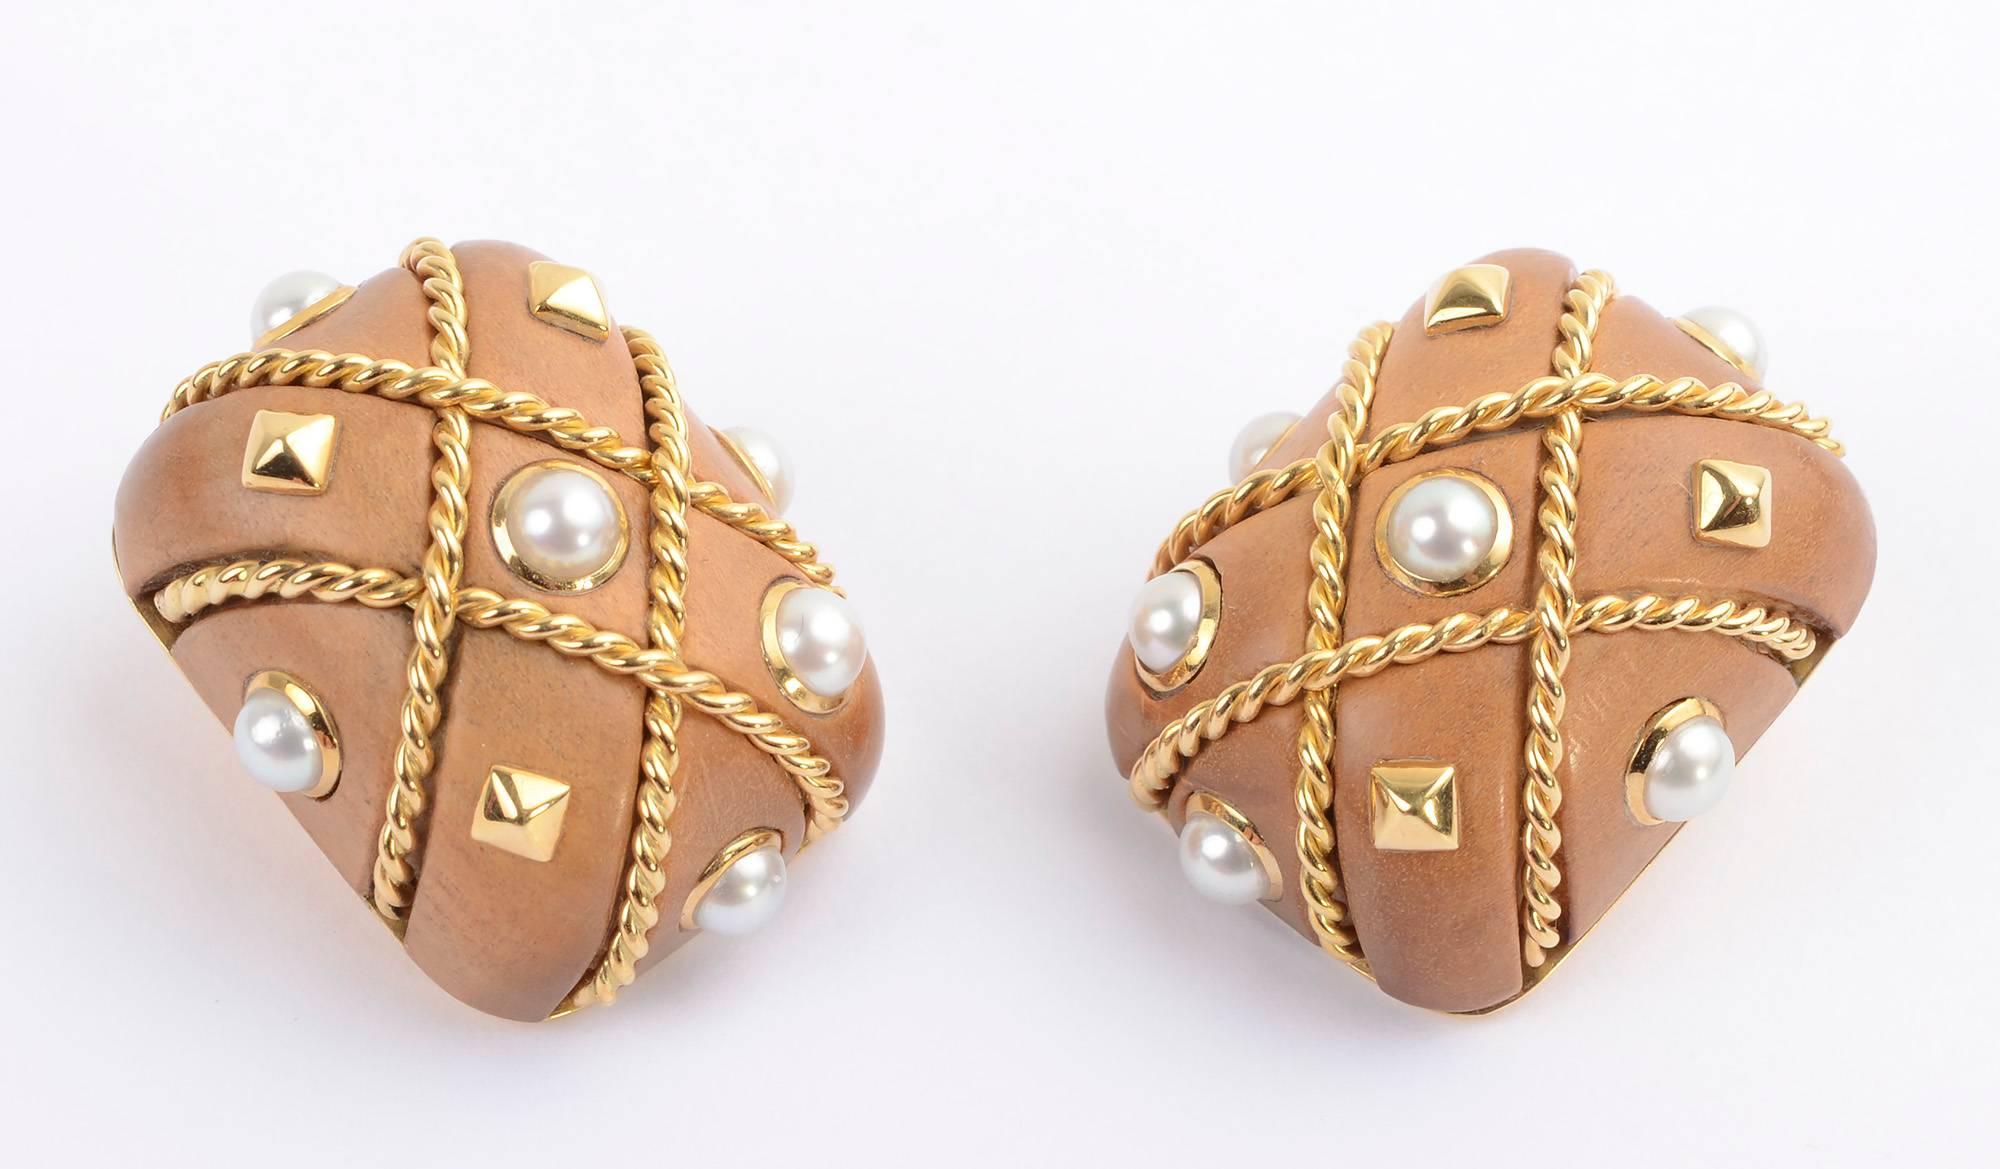 Classic Seaman Schepps 18 karat gold Cage earrings . Crisscross bands of twisted gold are interspersed with pearls and gold diamonds. The body of the earrings is made of walnut. They measure 13/16